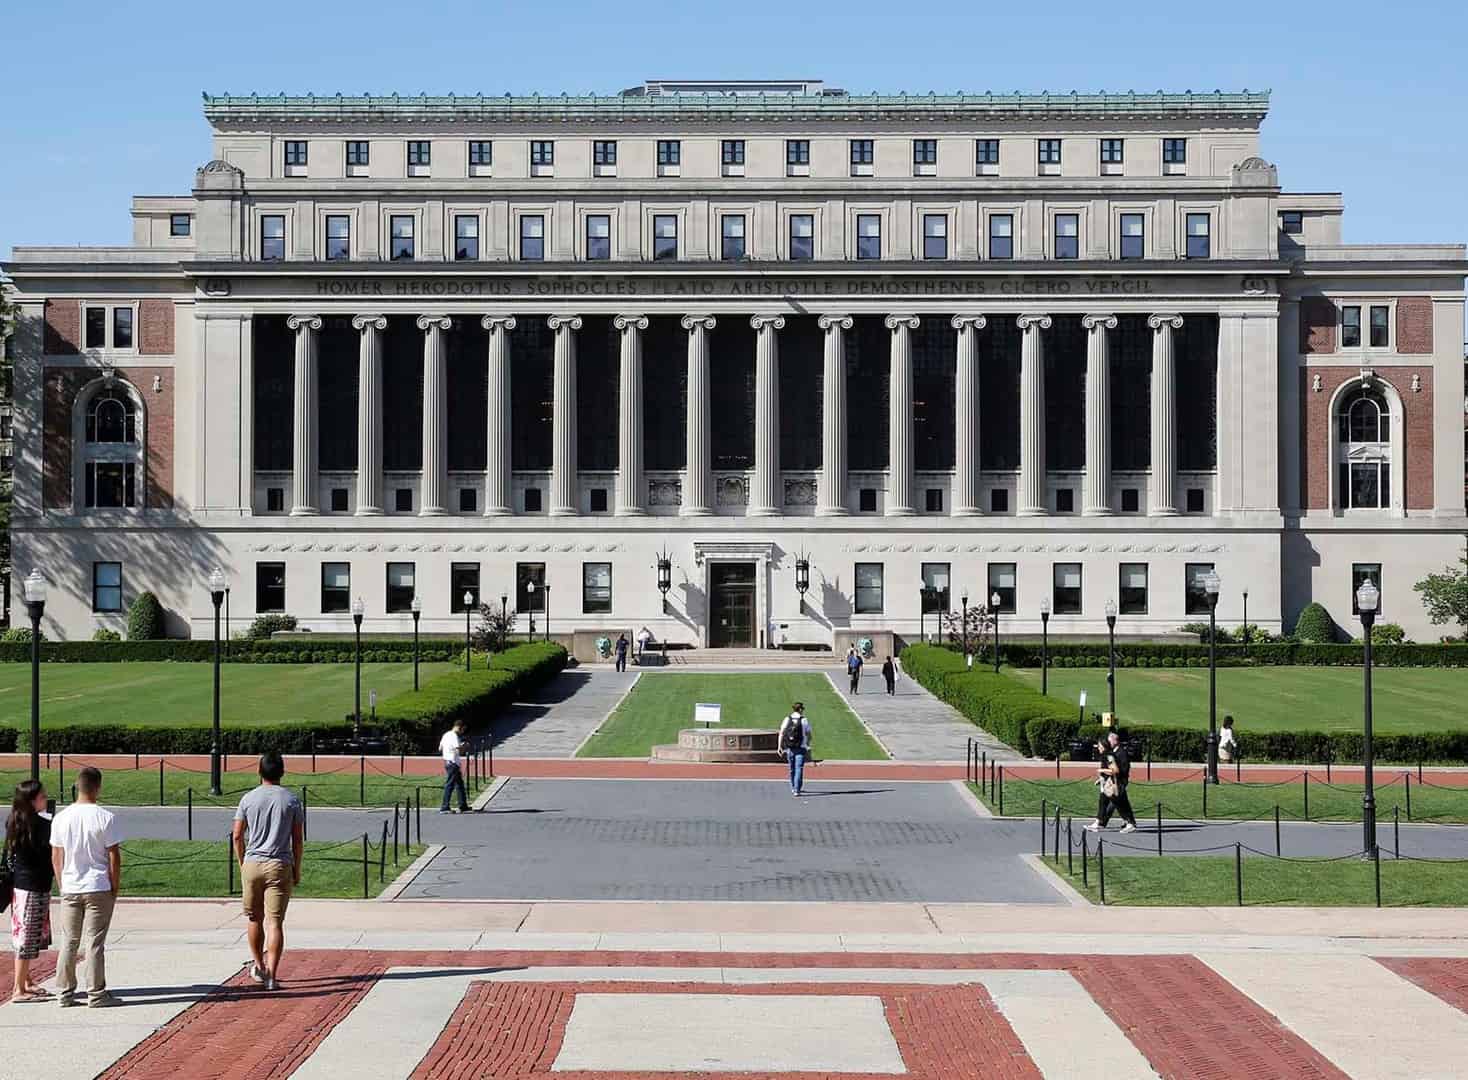 One year MBA at Columbia, USA